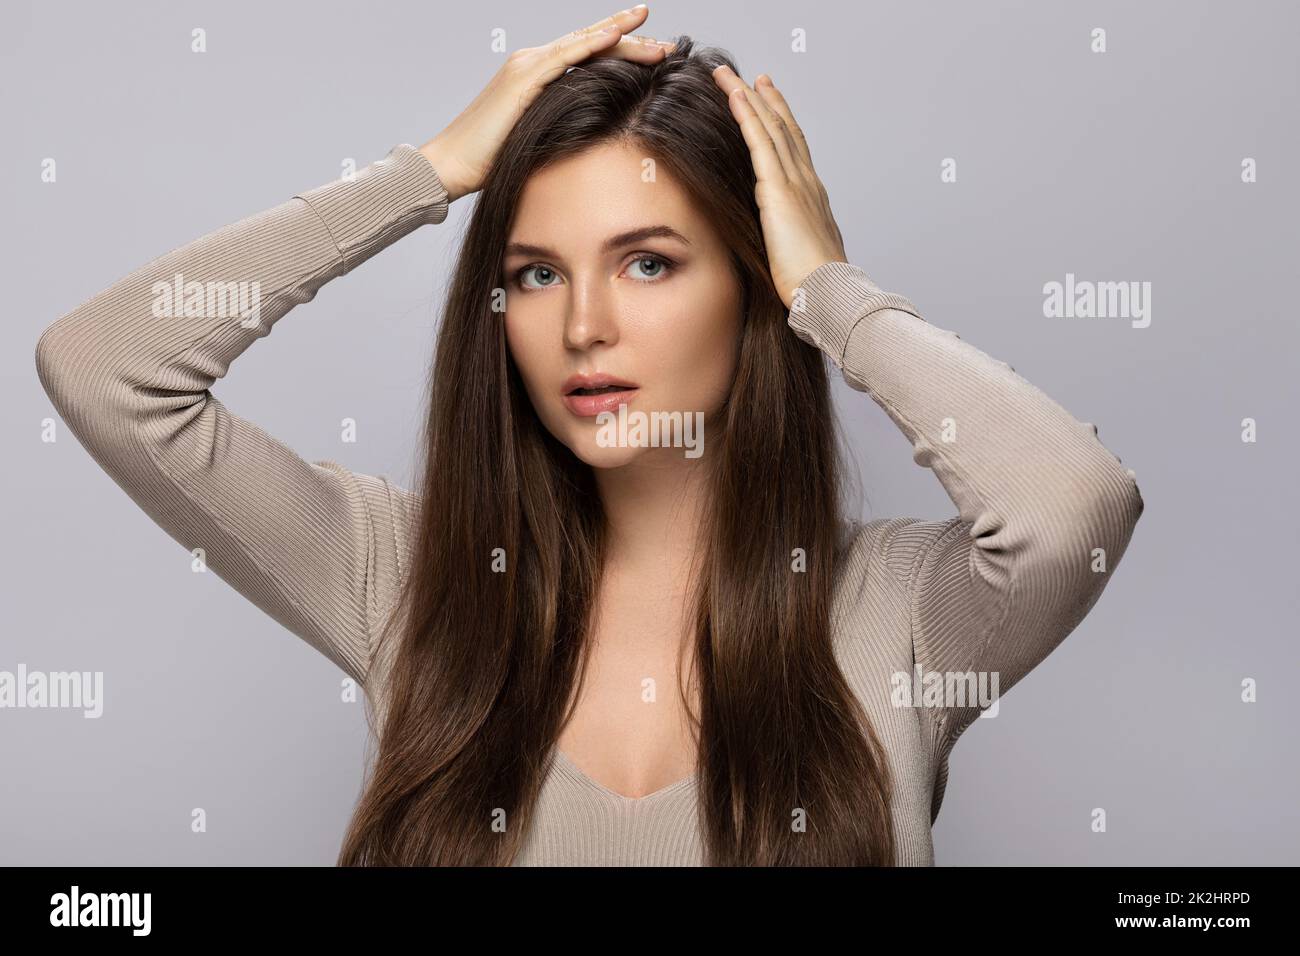 Woman surprised with a bad condition of her hair Stock Photo